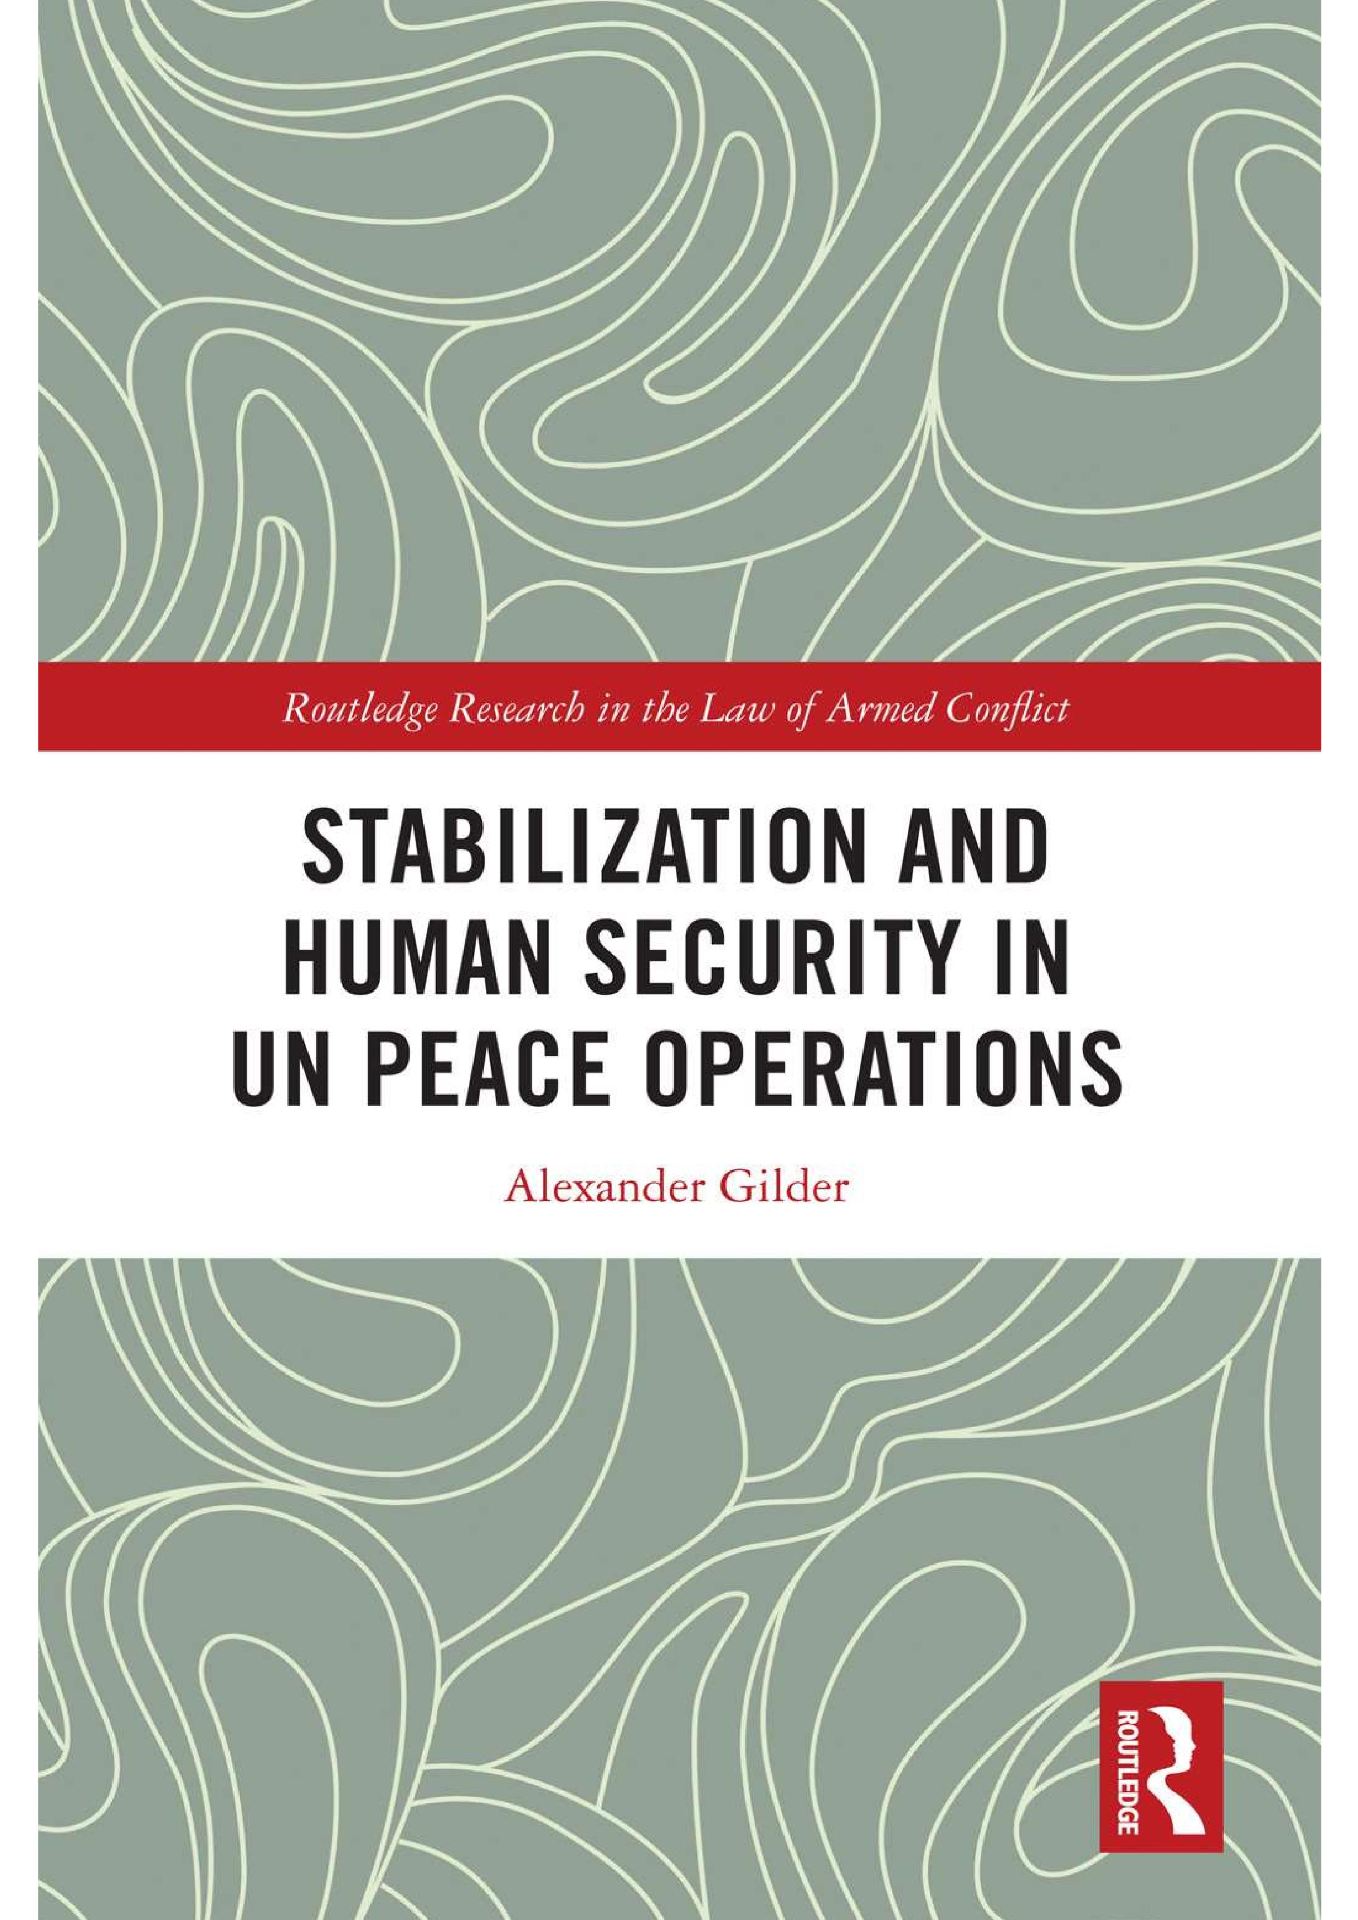 Book cover: Stabilization and Human Security in UN Peace Operations